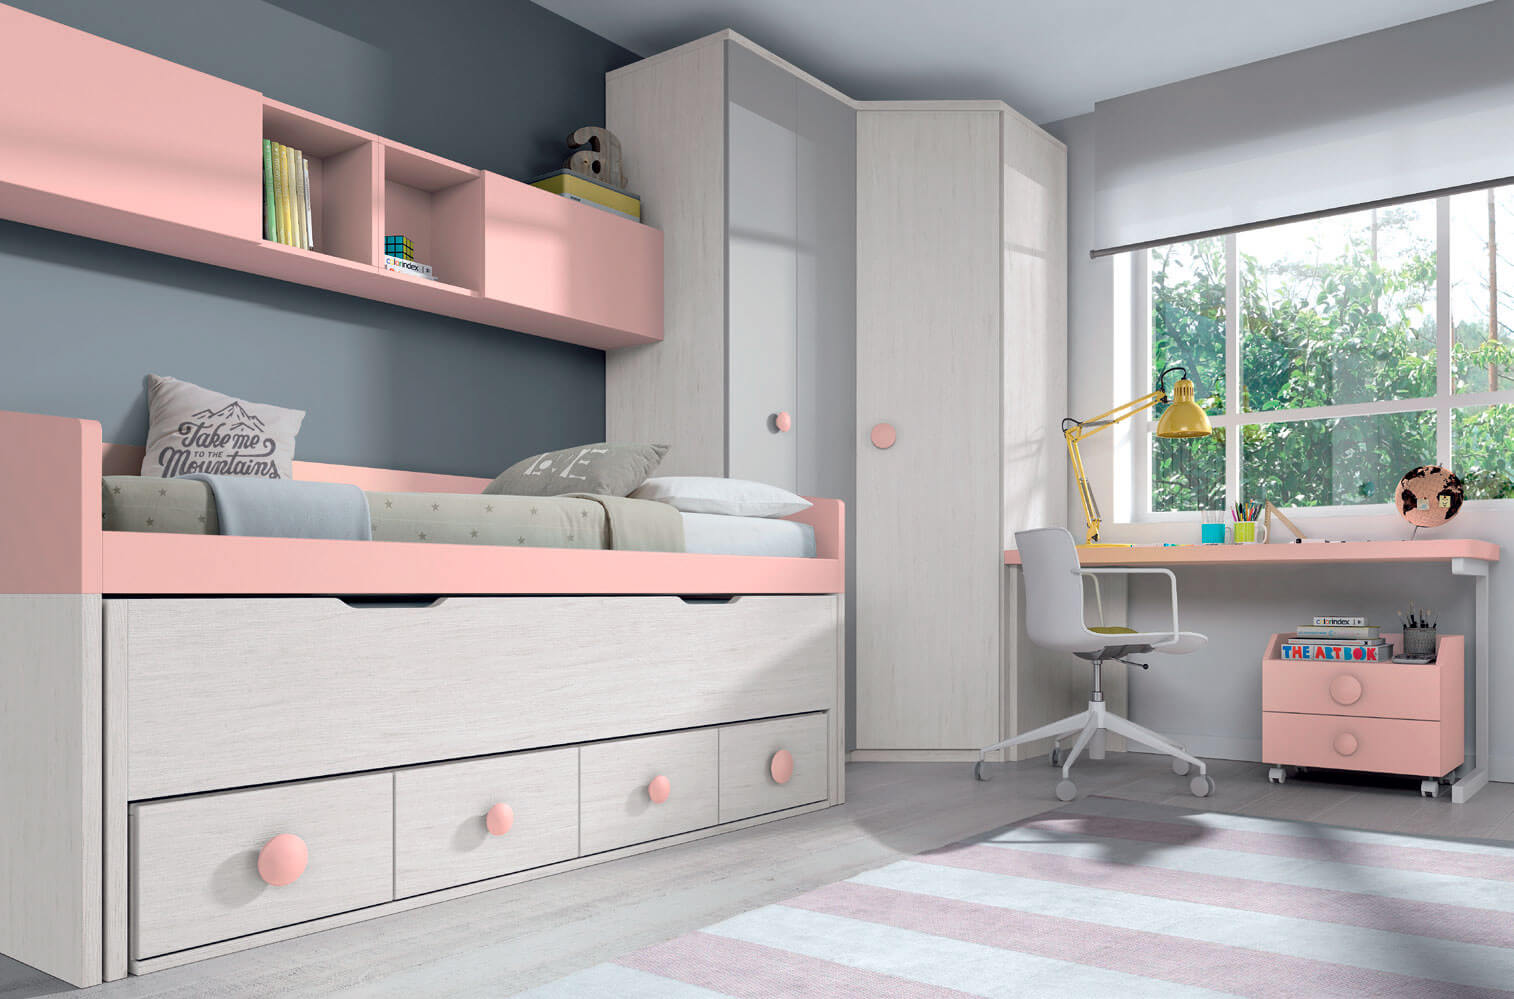 A pink and grey bedroom with a trundle bed.